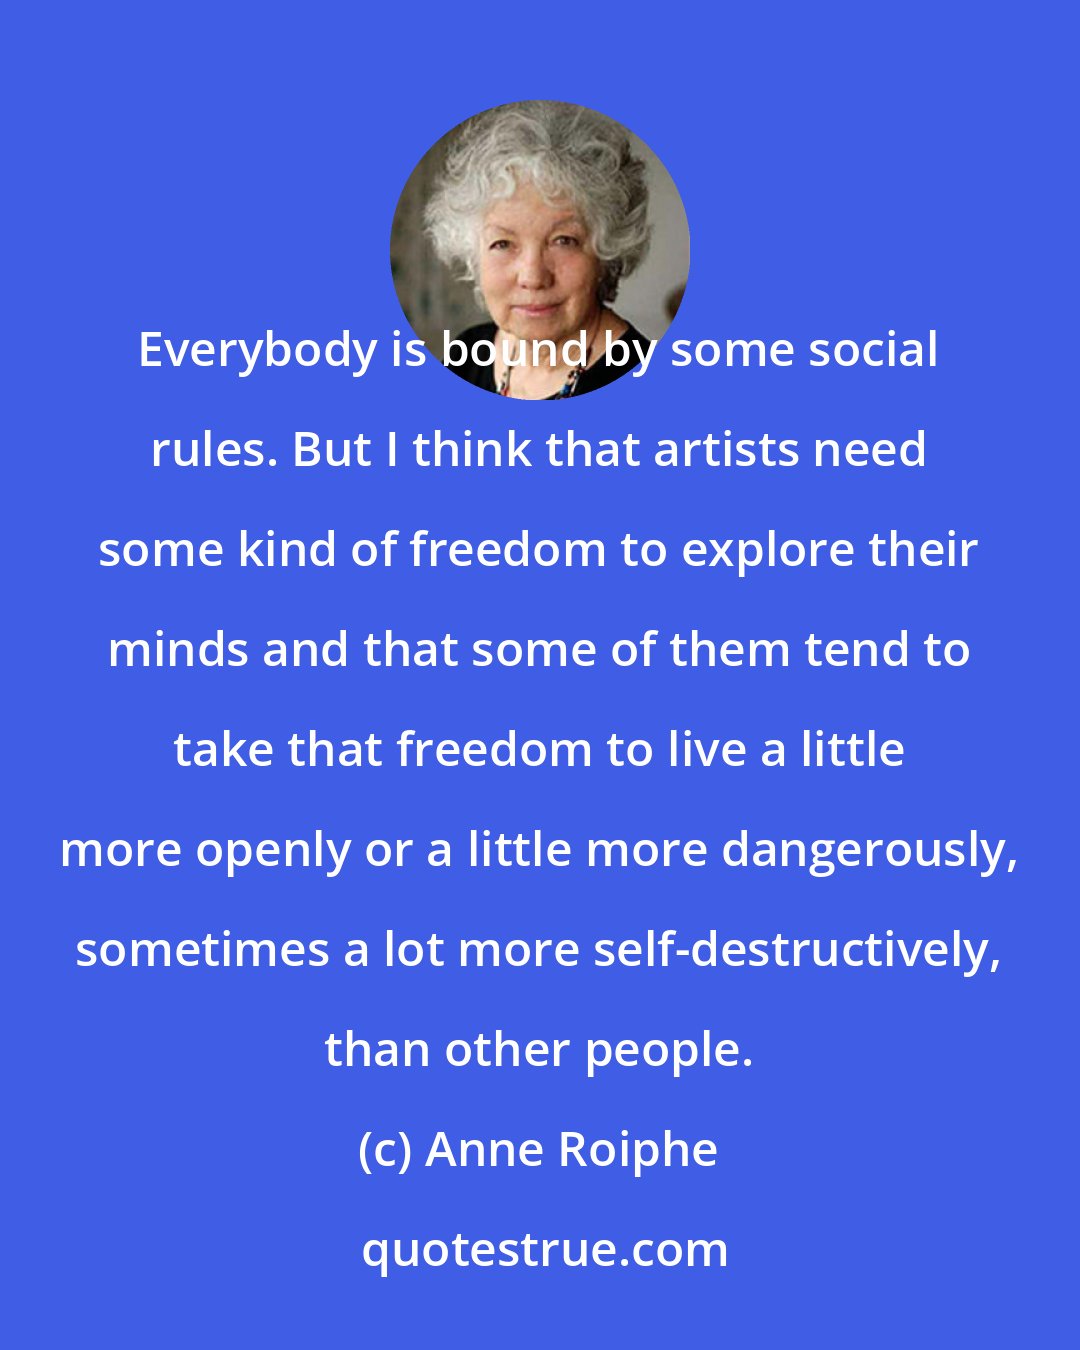 Anne Roiphe: Everybody is bound by some social rules. But I think that artists need some kind of freedom to explore their minds and that some of them tend to take that freedom to live a little more openly or a little more dangerously, sometimes a lot more self-destructively, than other people.